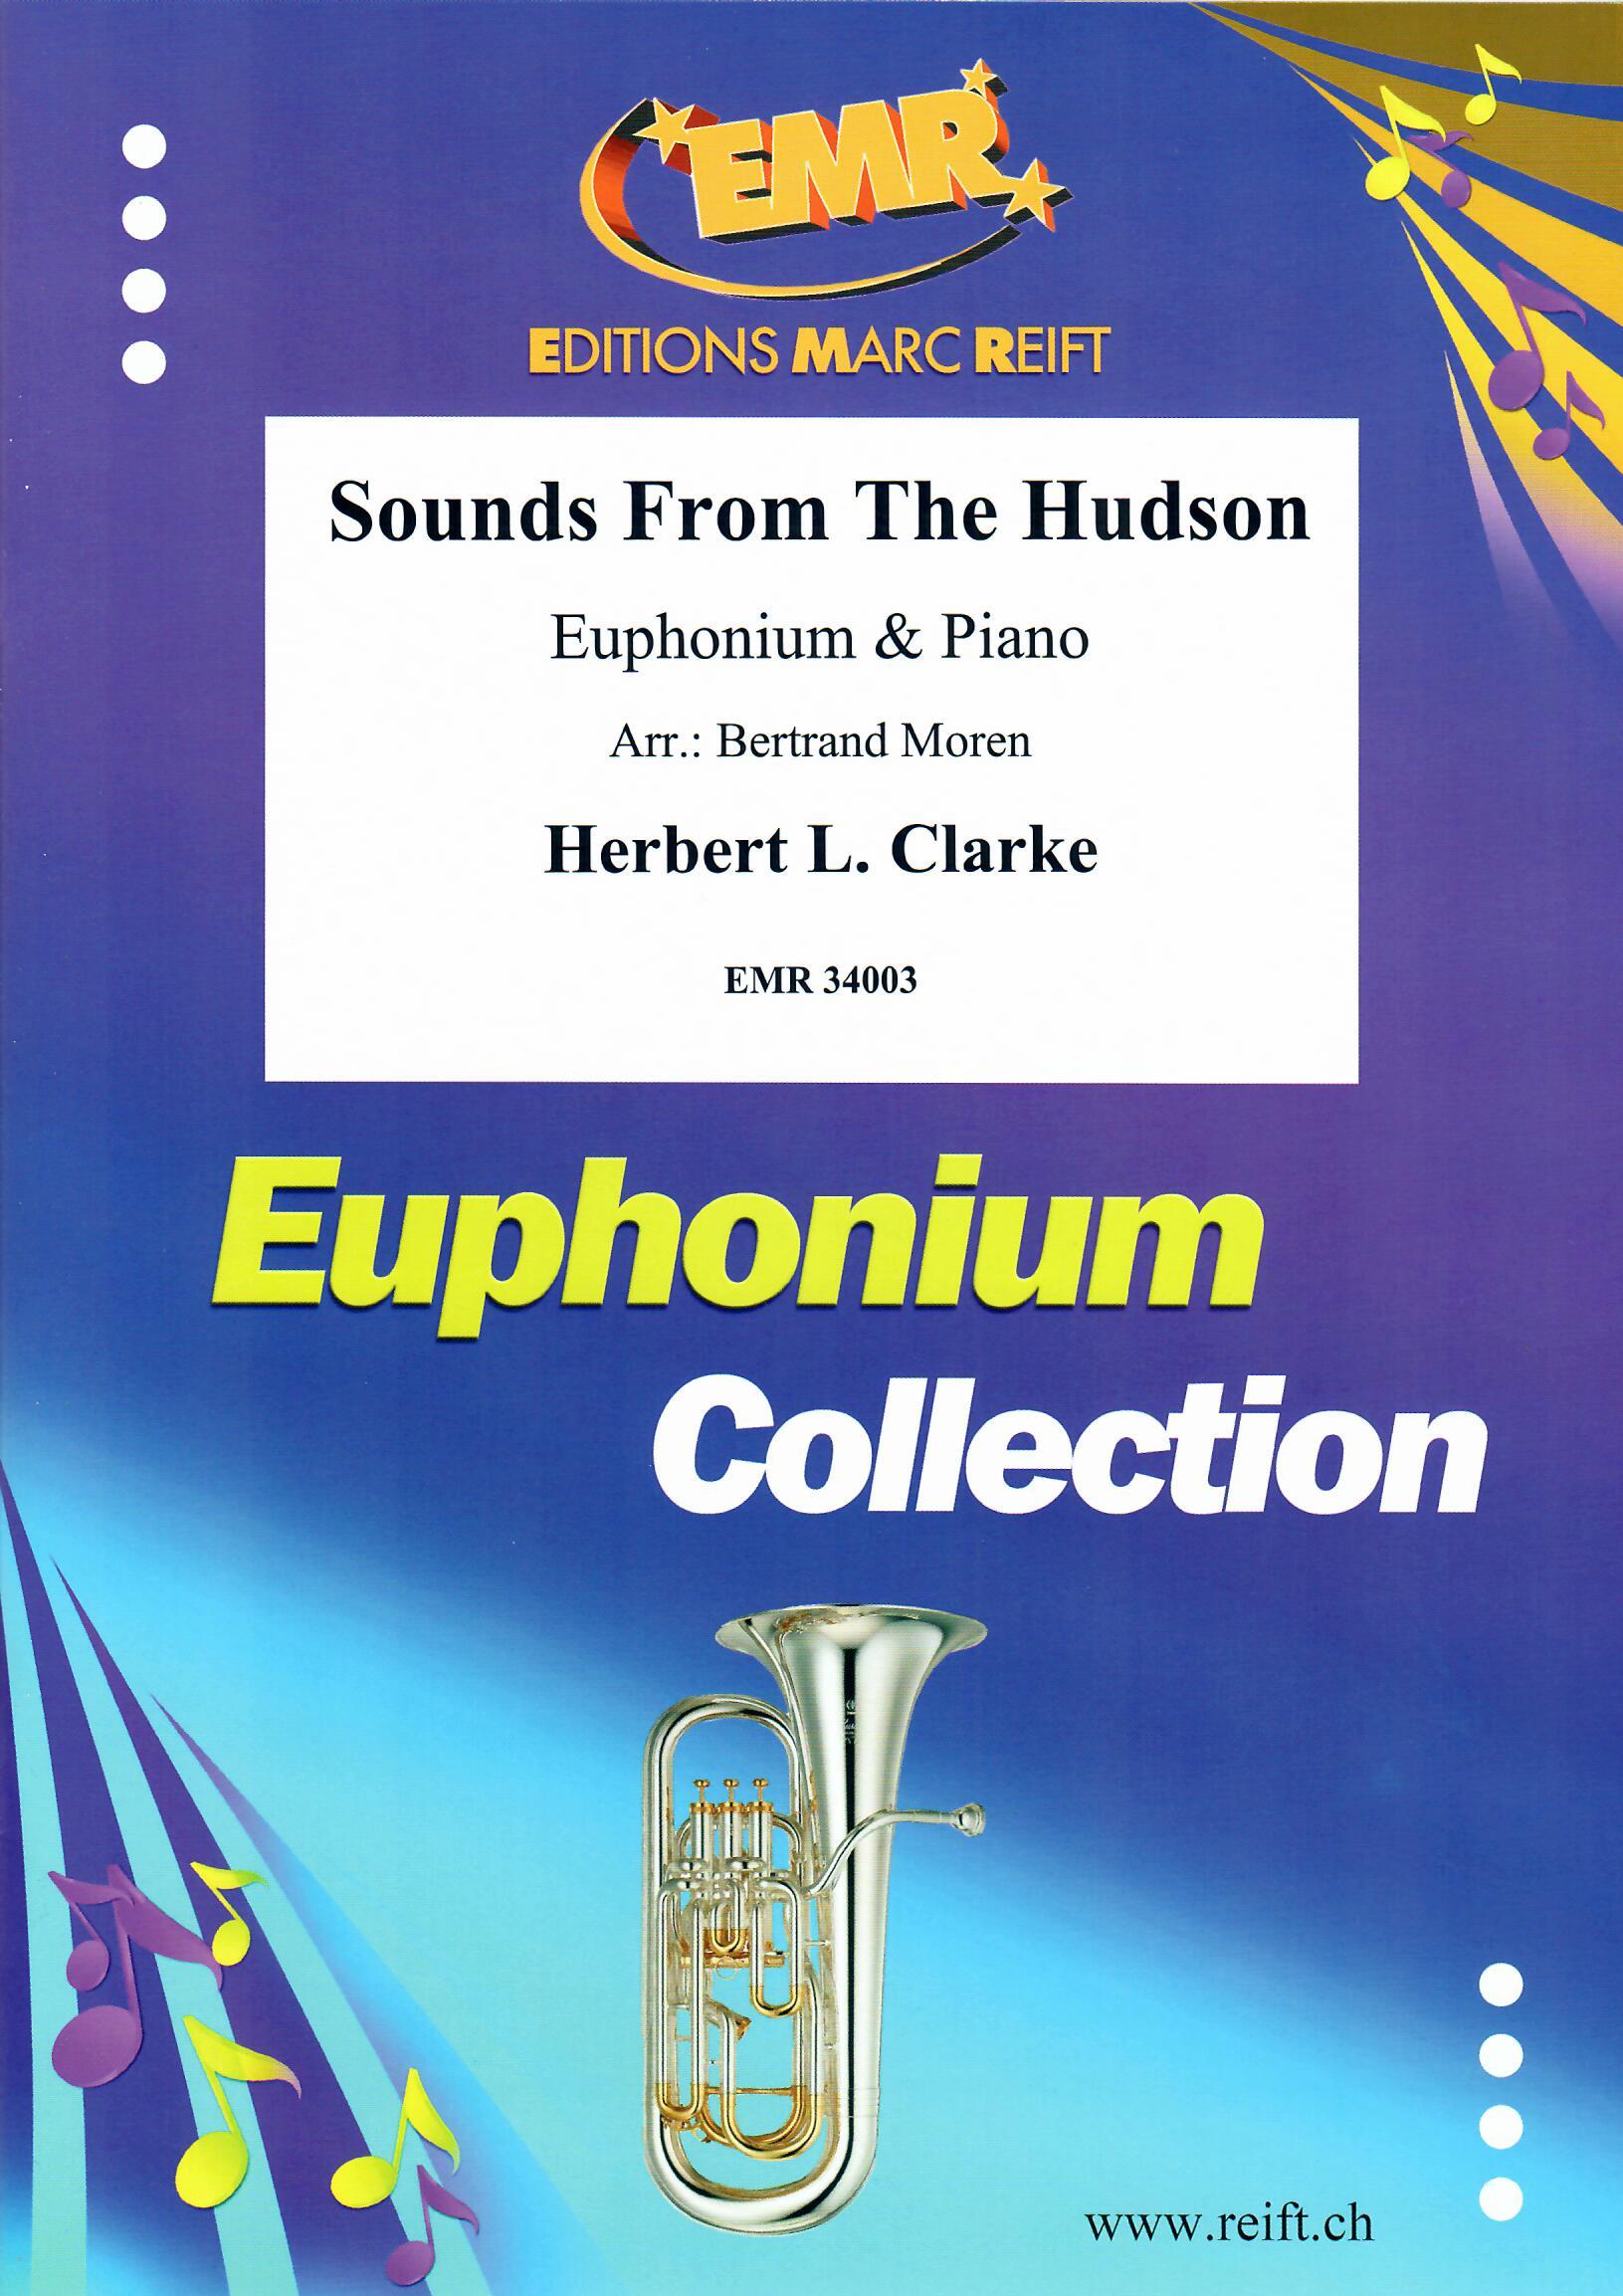 SOUNDS FROM THE HUDSON, SOLOS - Euphonium